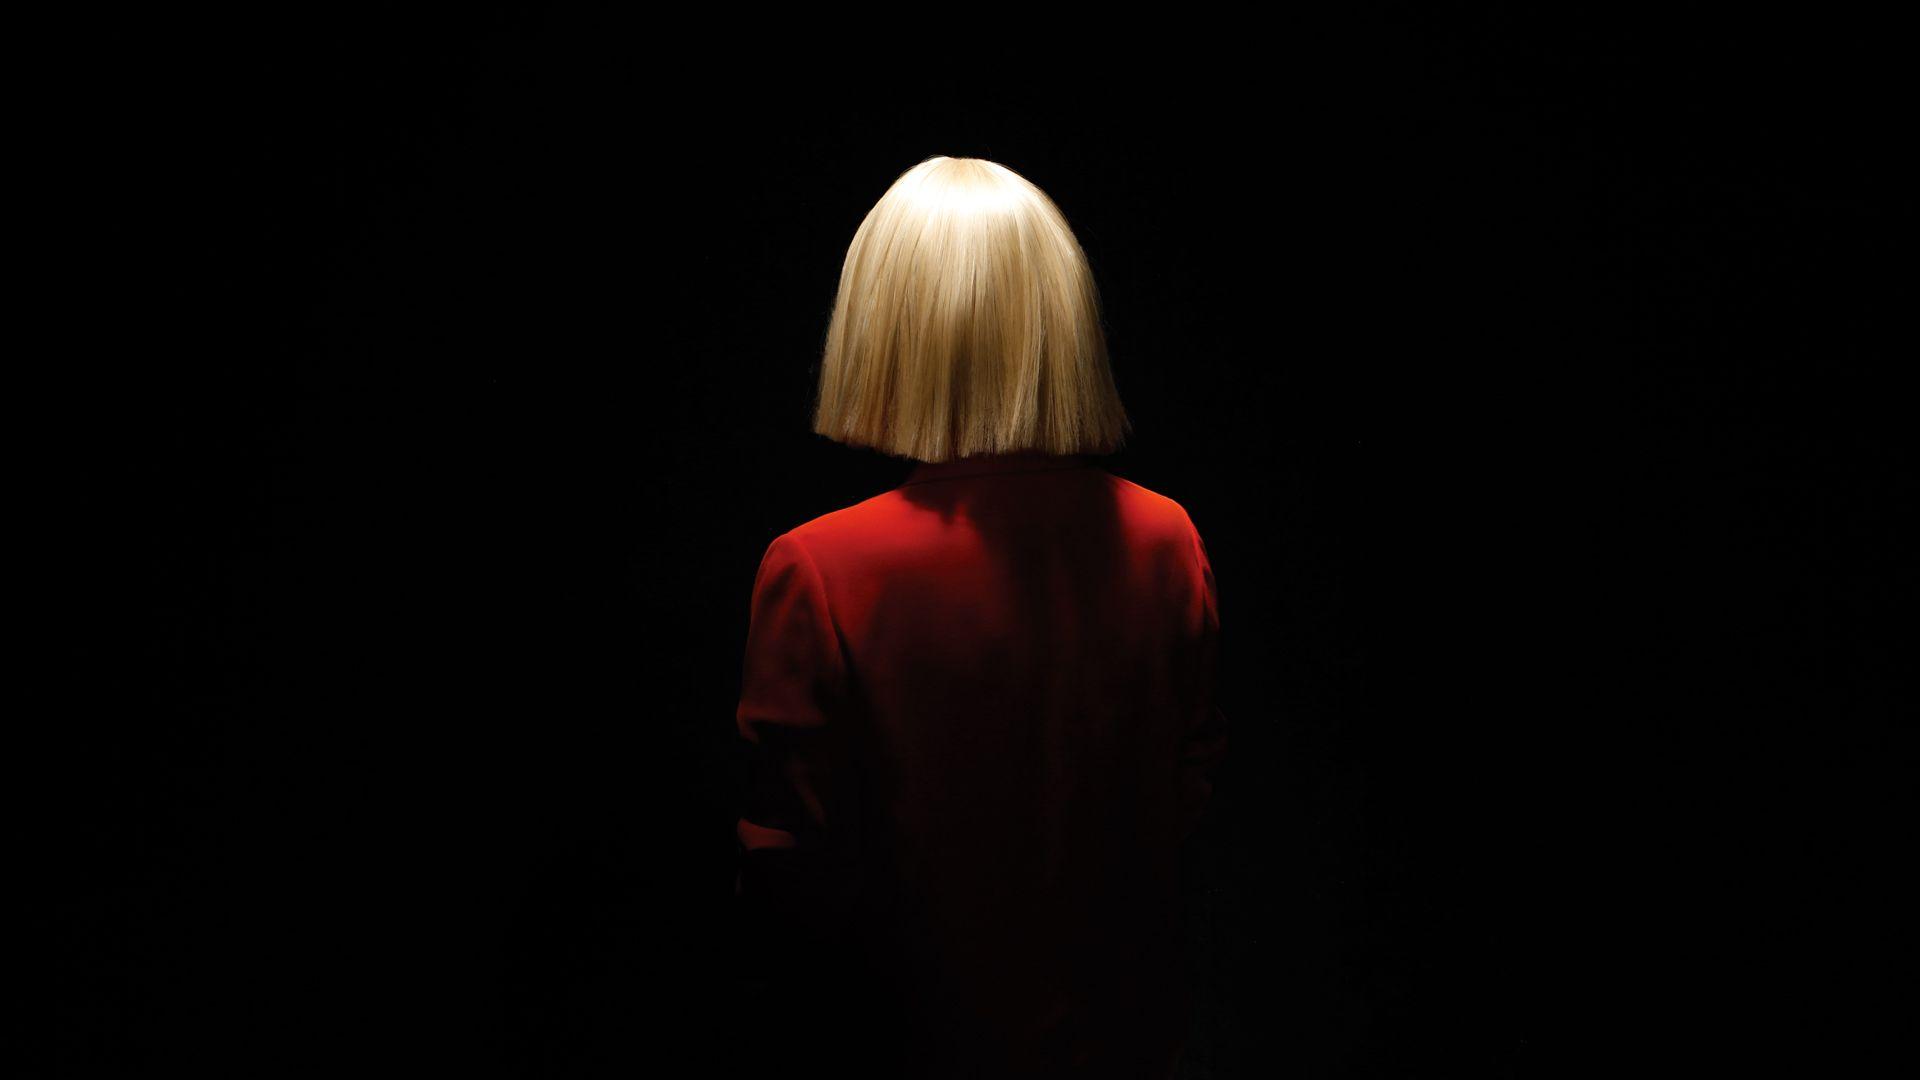 IN CASE YOU MISSED IT: Sia reveals she is on the autism spectrum